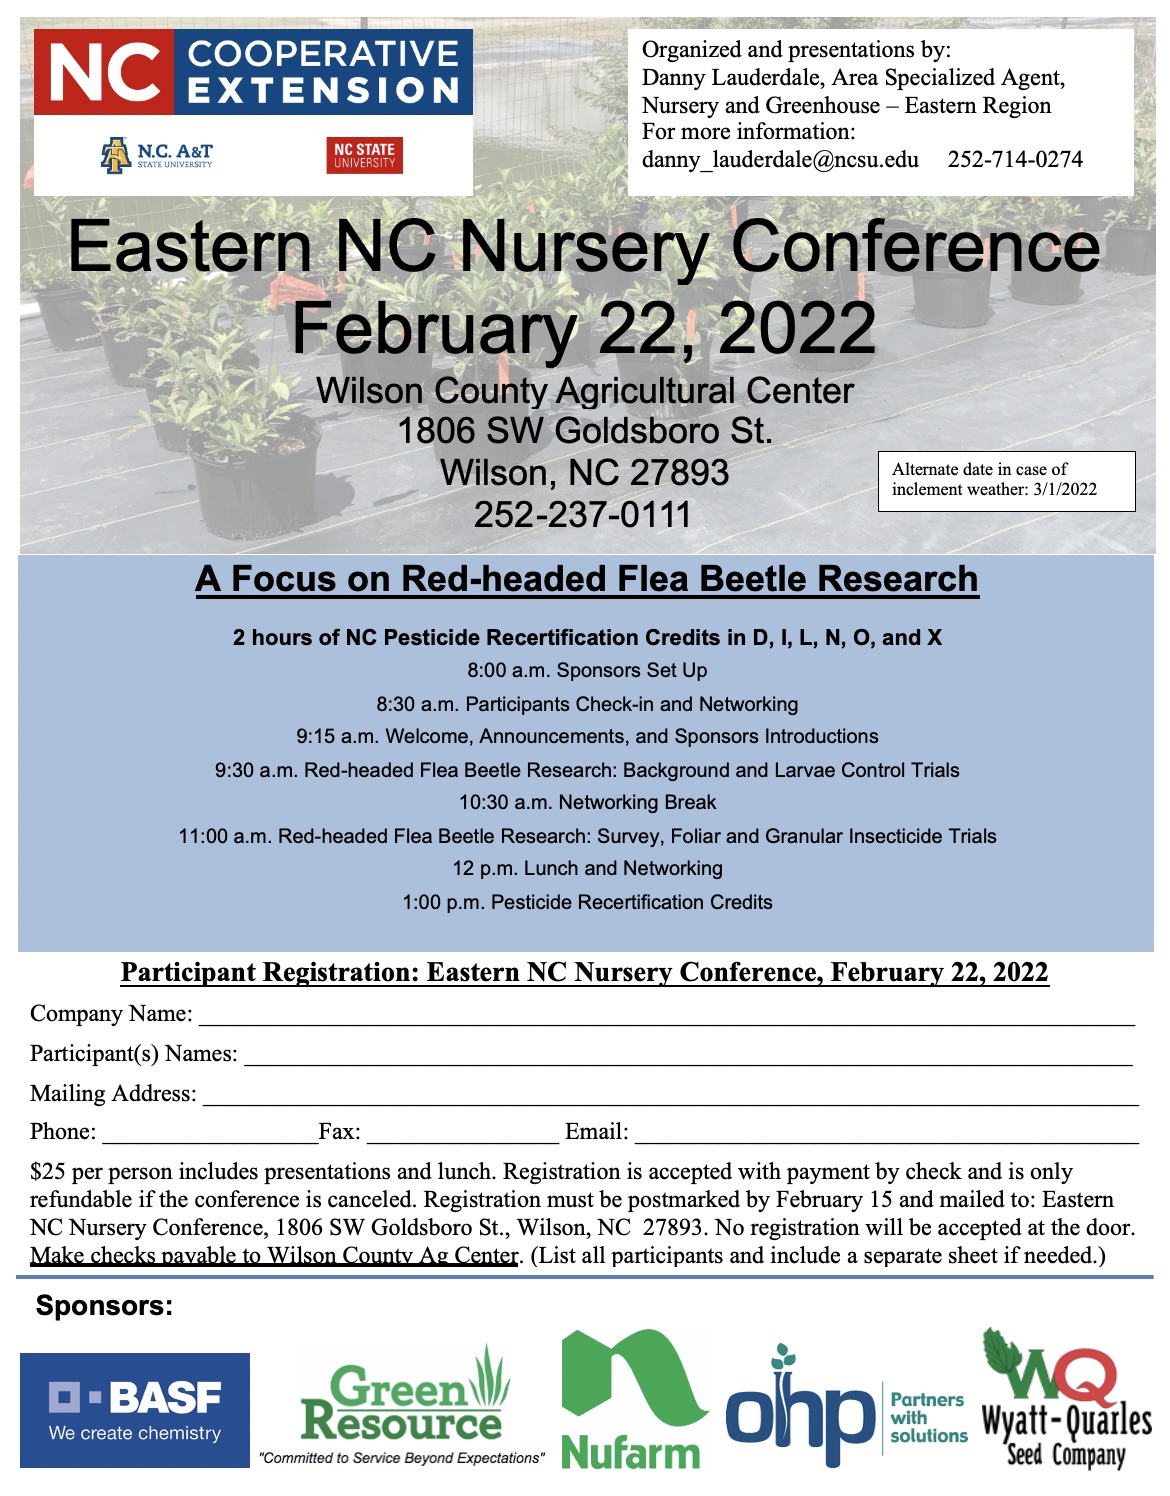 Eastern NC Nursery Conference Flyer Image